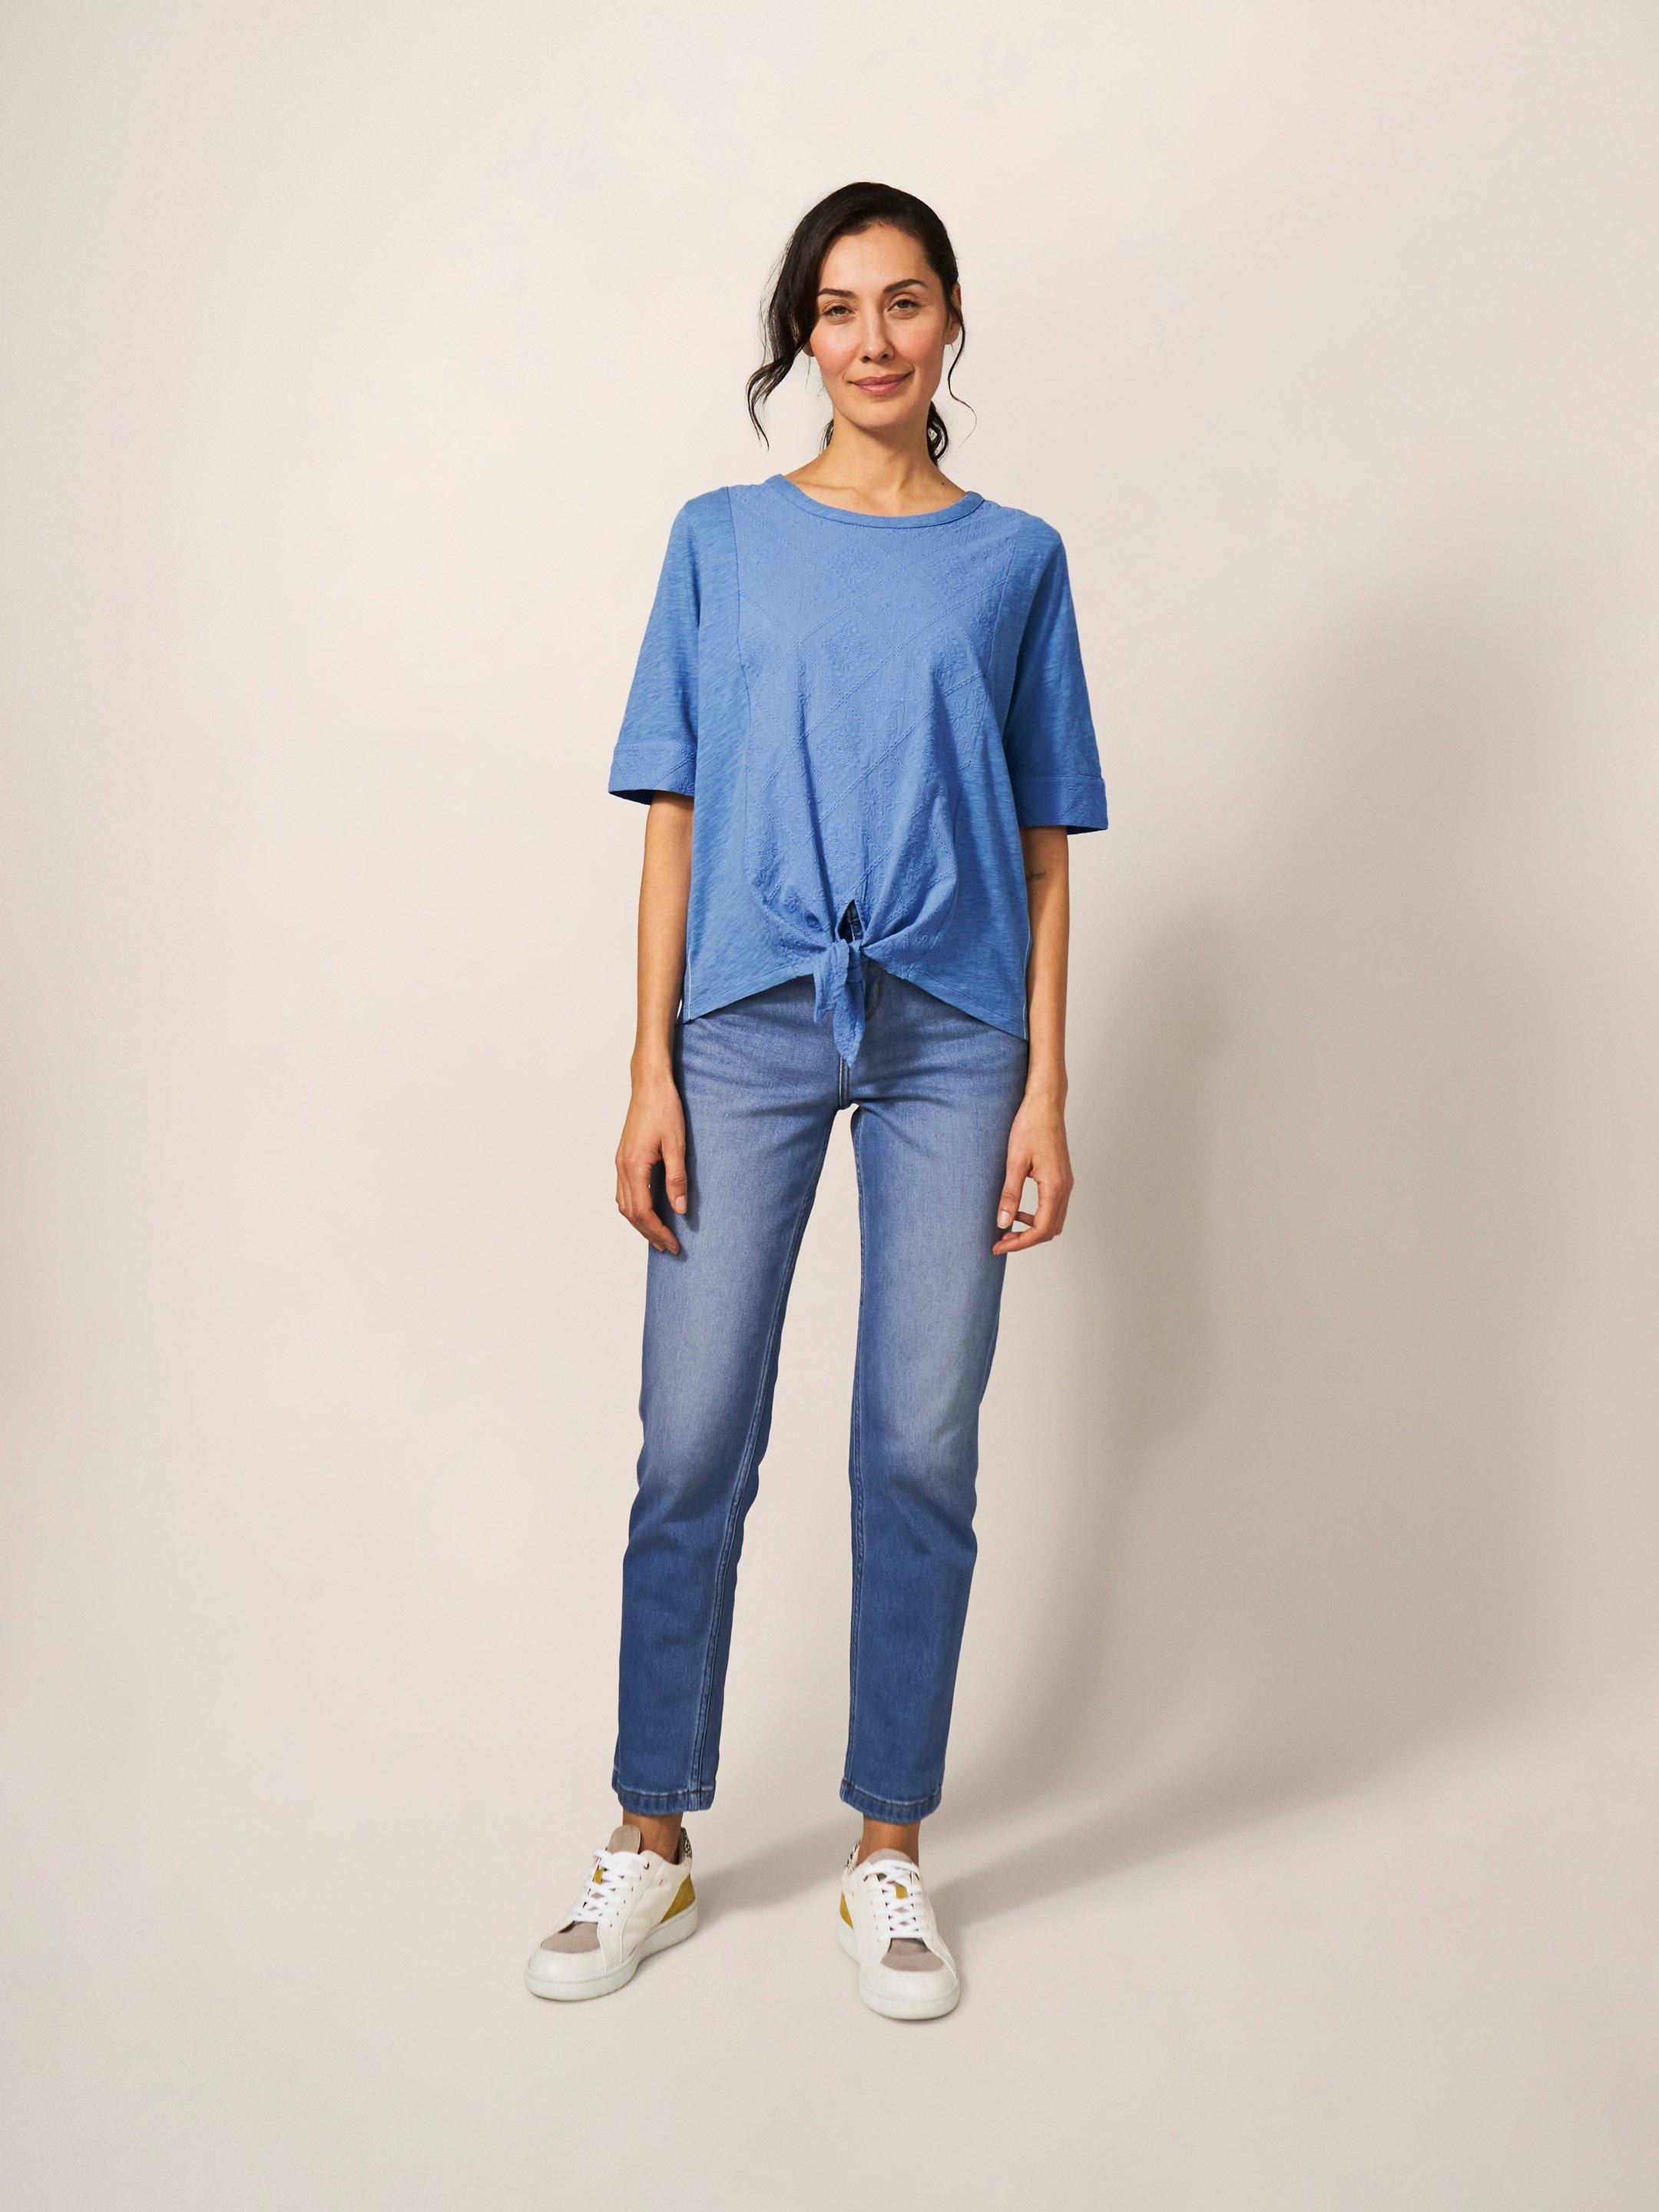 Madewell Button Back Tie Tee Sherbet Stripe S